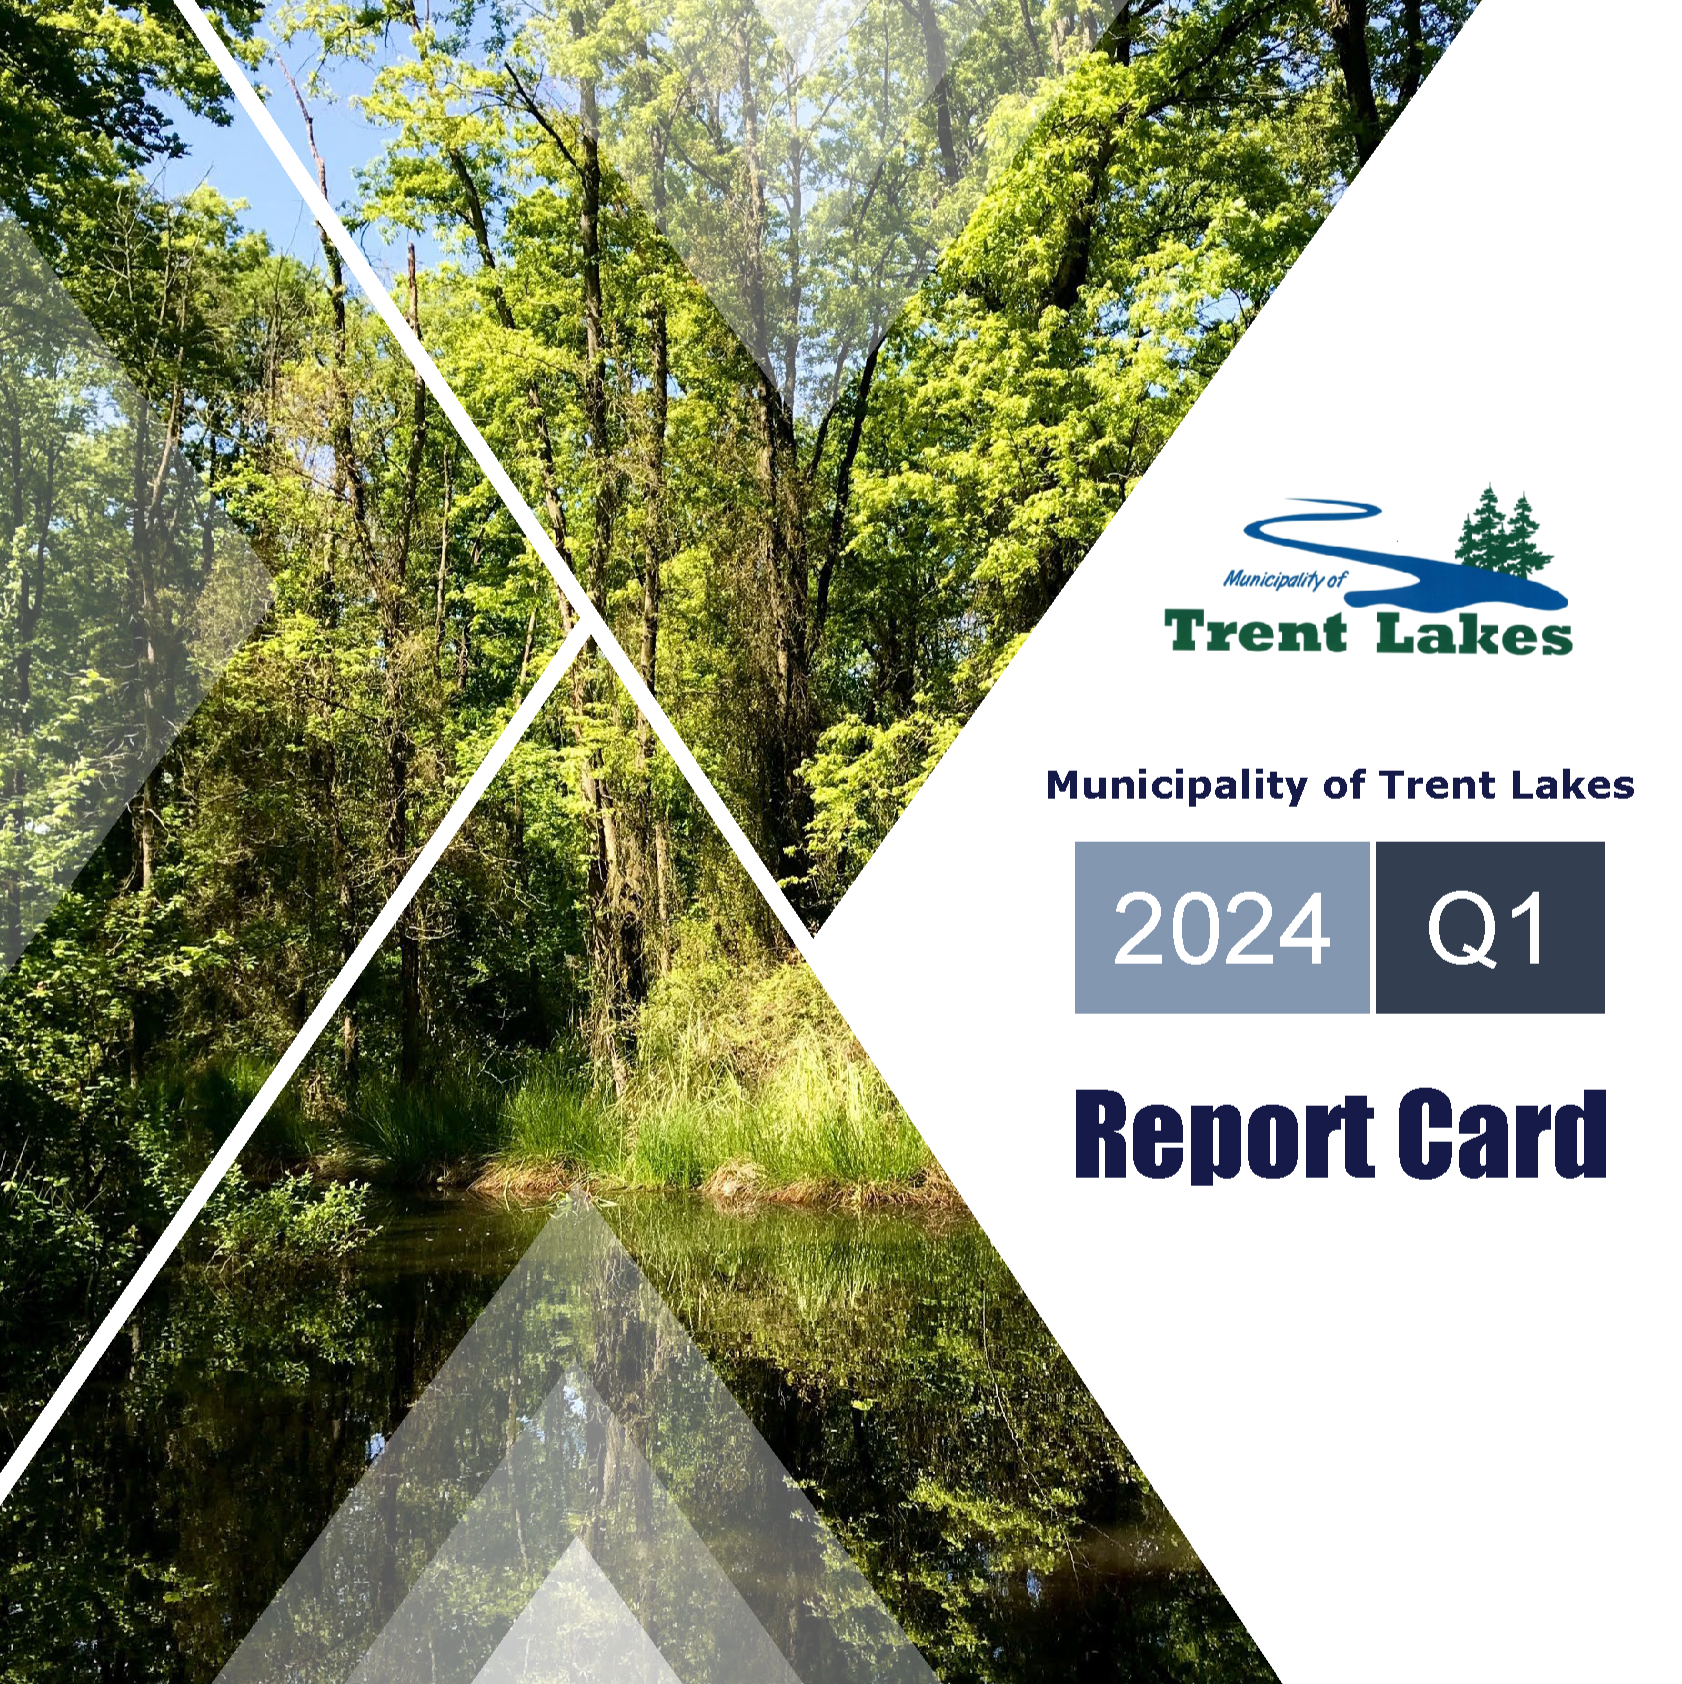 Image of marsh area in the summer. Text reads: Municipality of Trent Lakes Q1 2024 Report Card.